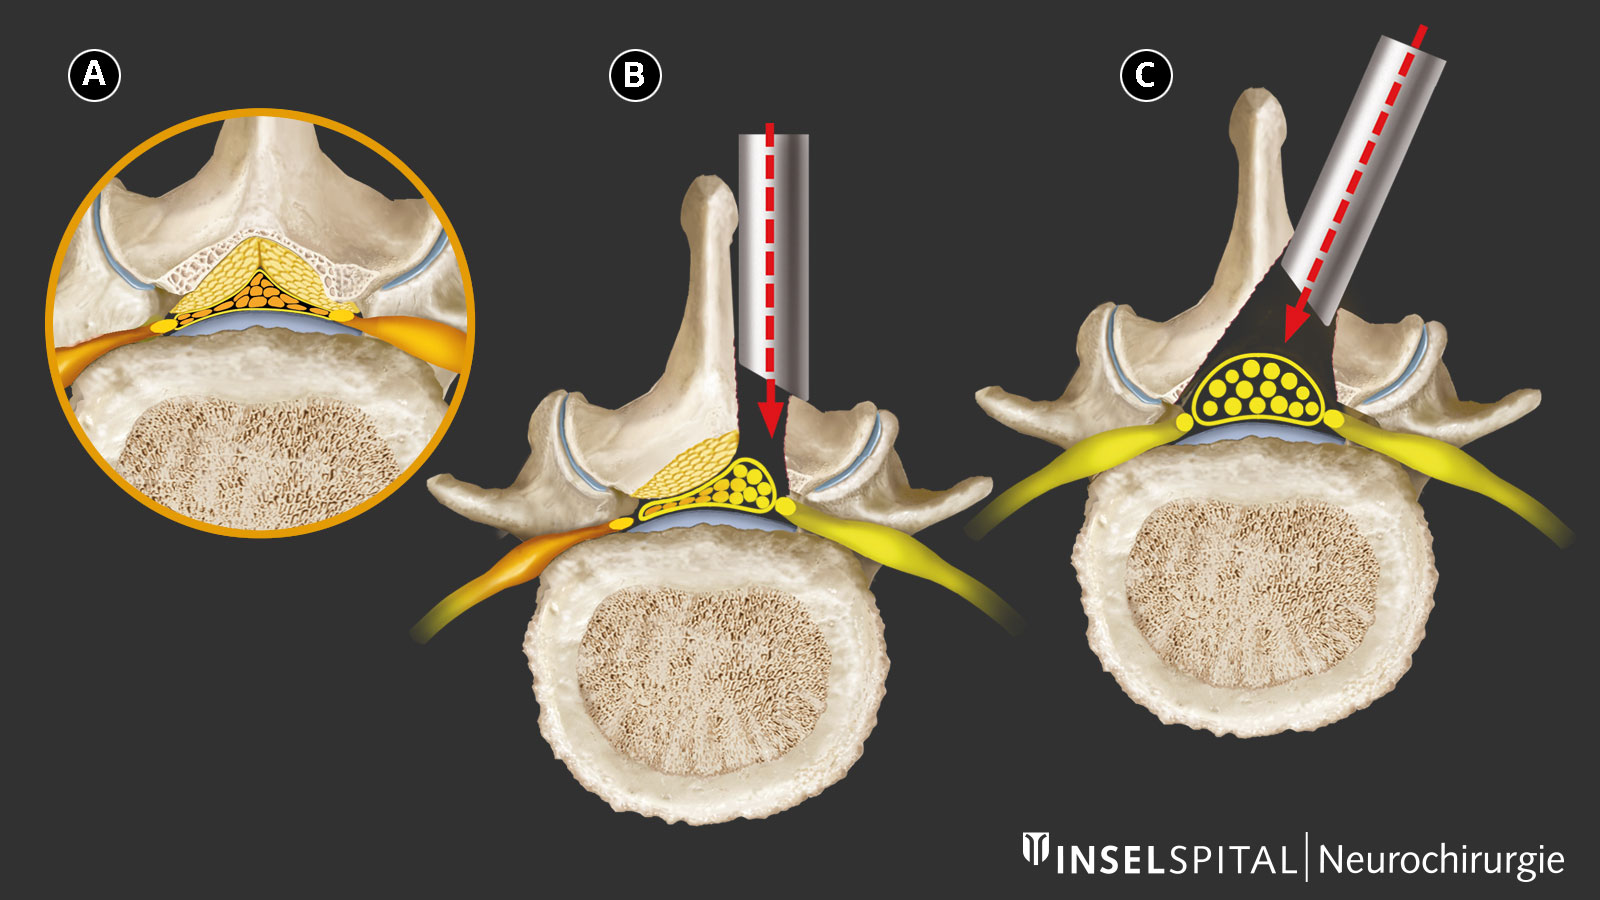 The tubular microsurgery of a spinal canal stenosis is shown here in 3 drawings.